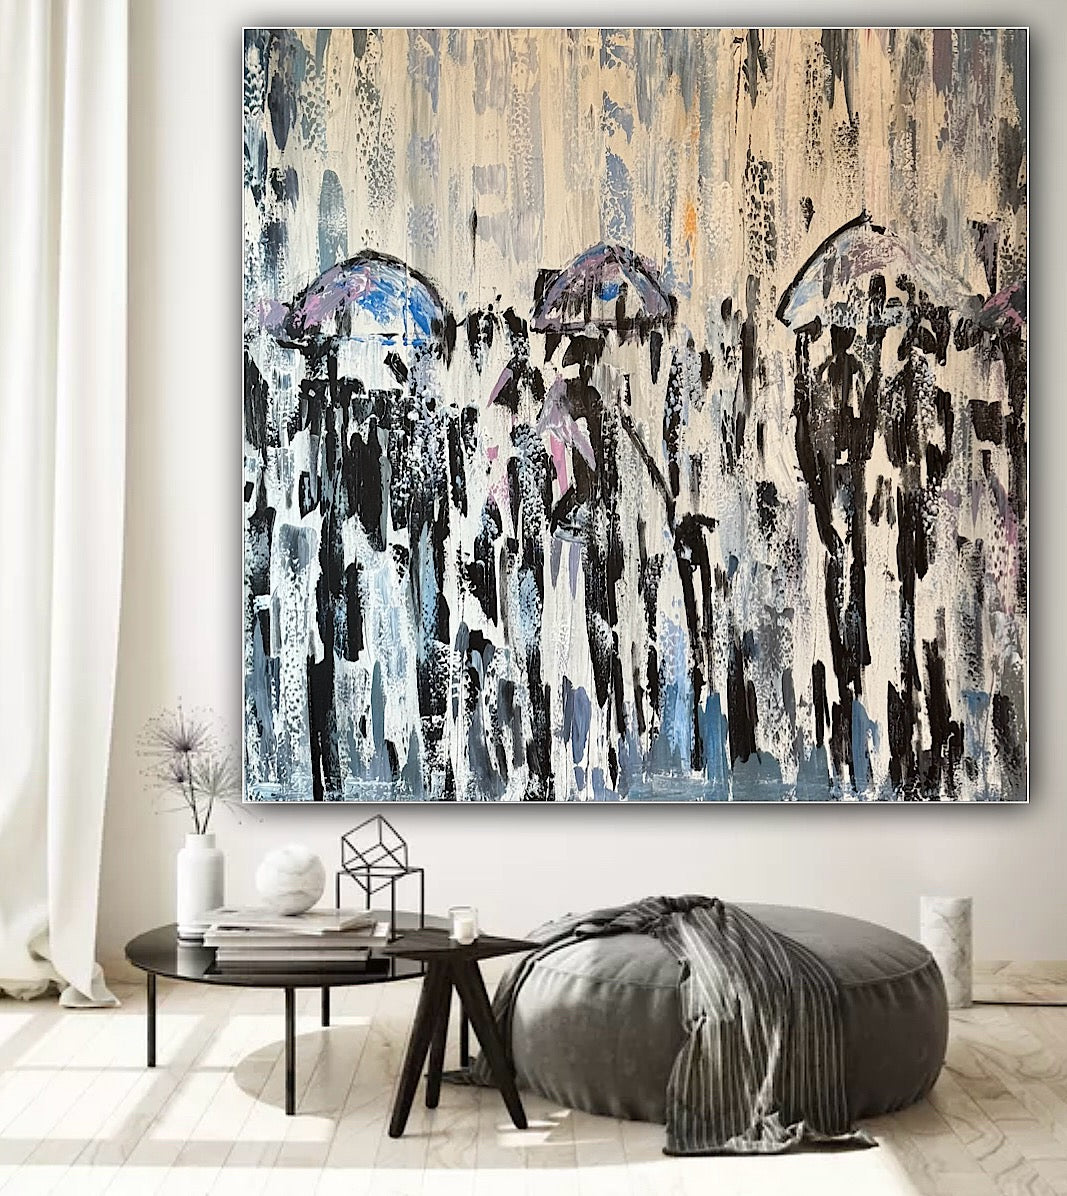 London in the Rain abstract oil painting  from Sabina Swan Art 100 x 100cm